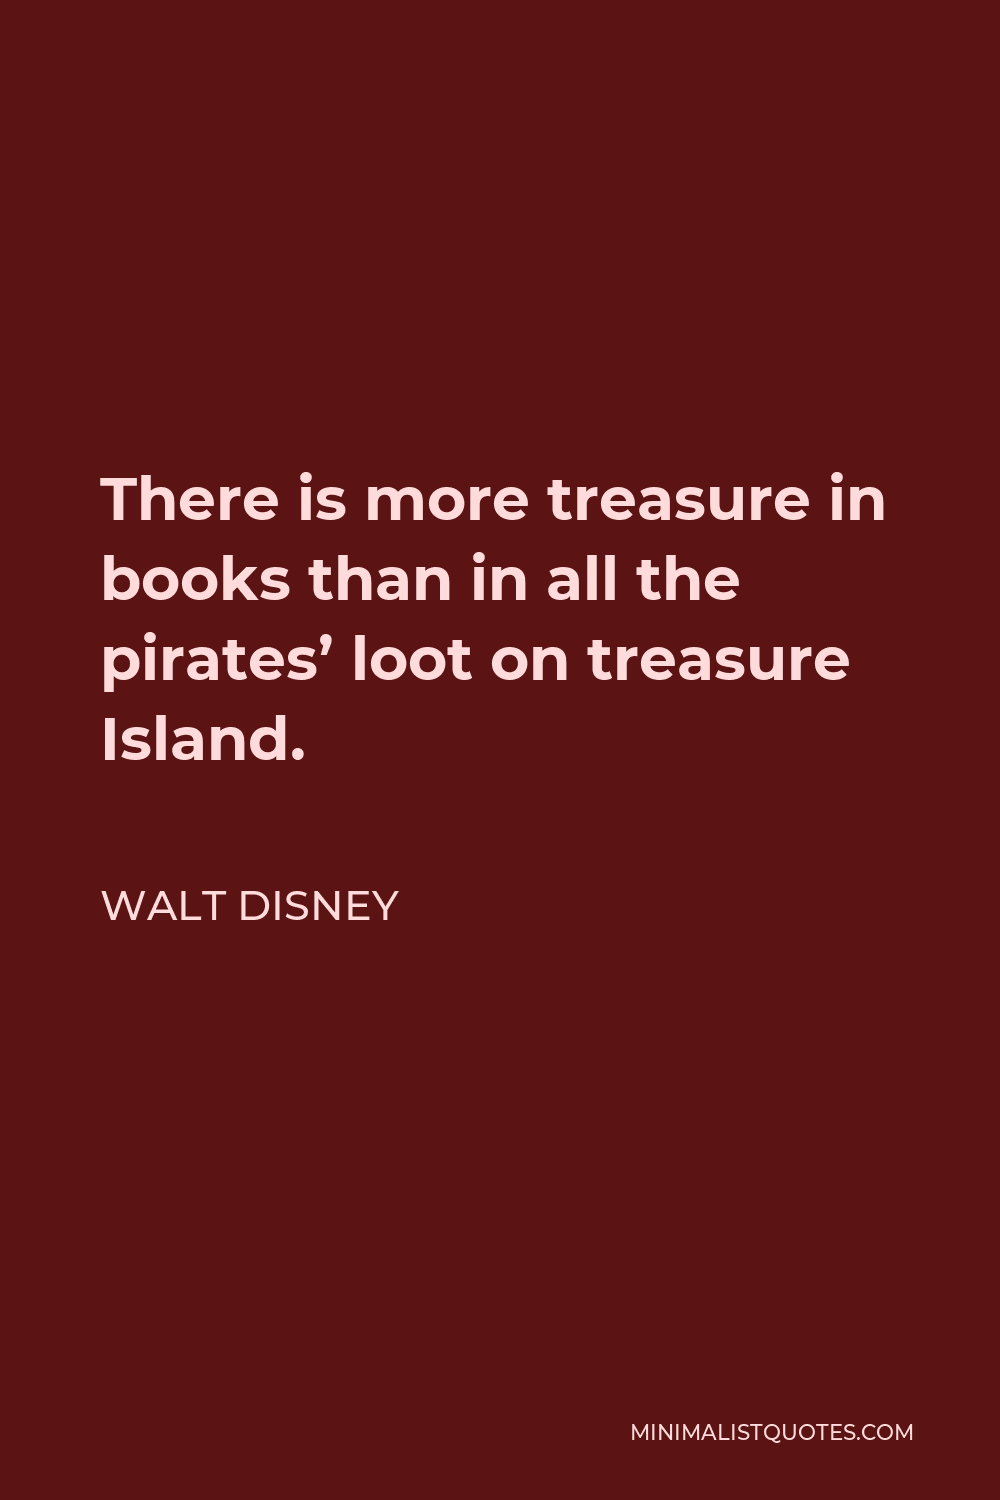 Walt Disney Quote - There is more treasure in books than in all the pirates’ loot on treasure Island.